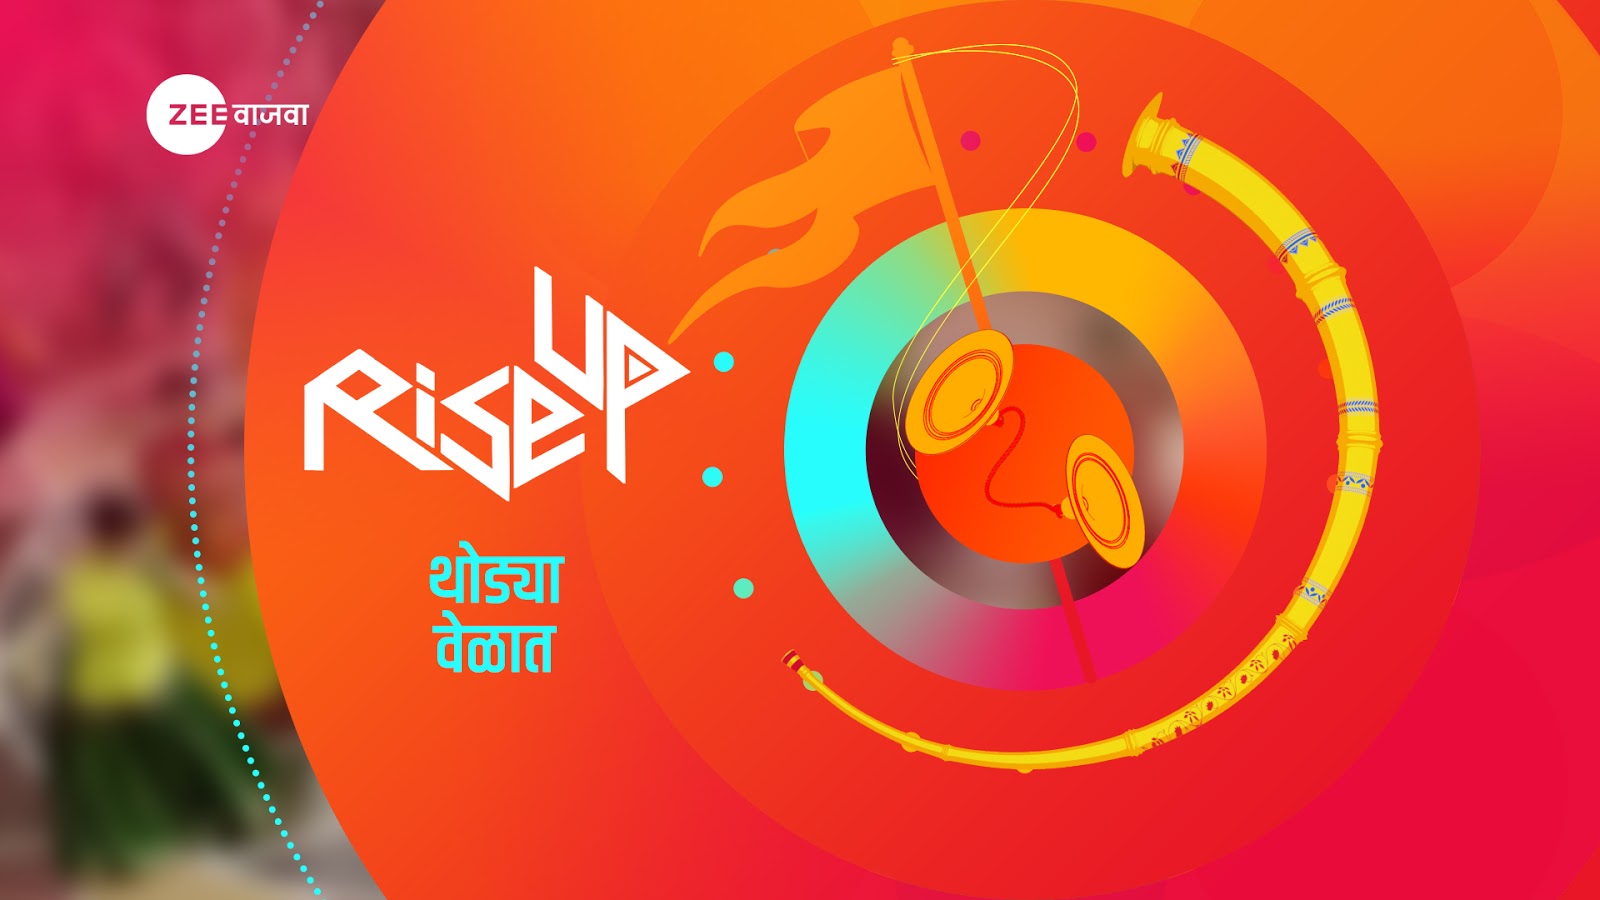 Zee Marathi HD to launch on November 20 with simulcast content | India.com